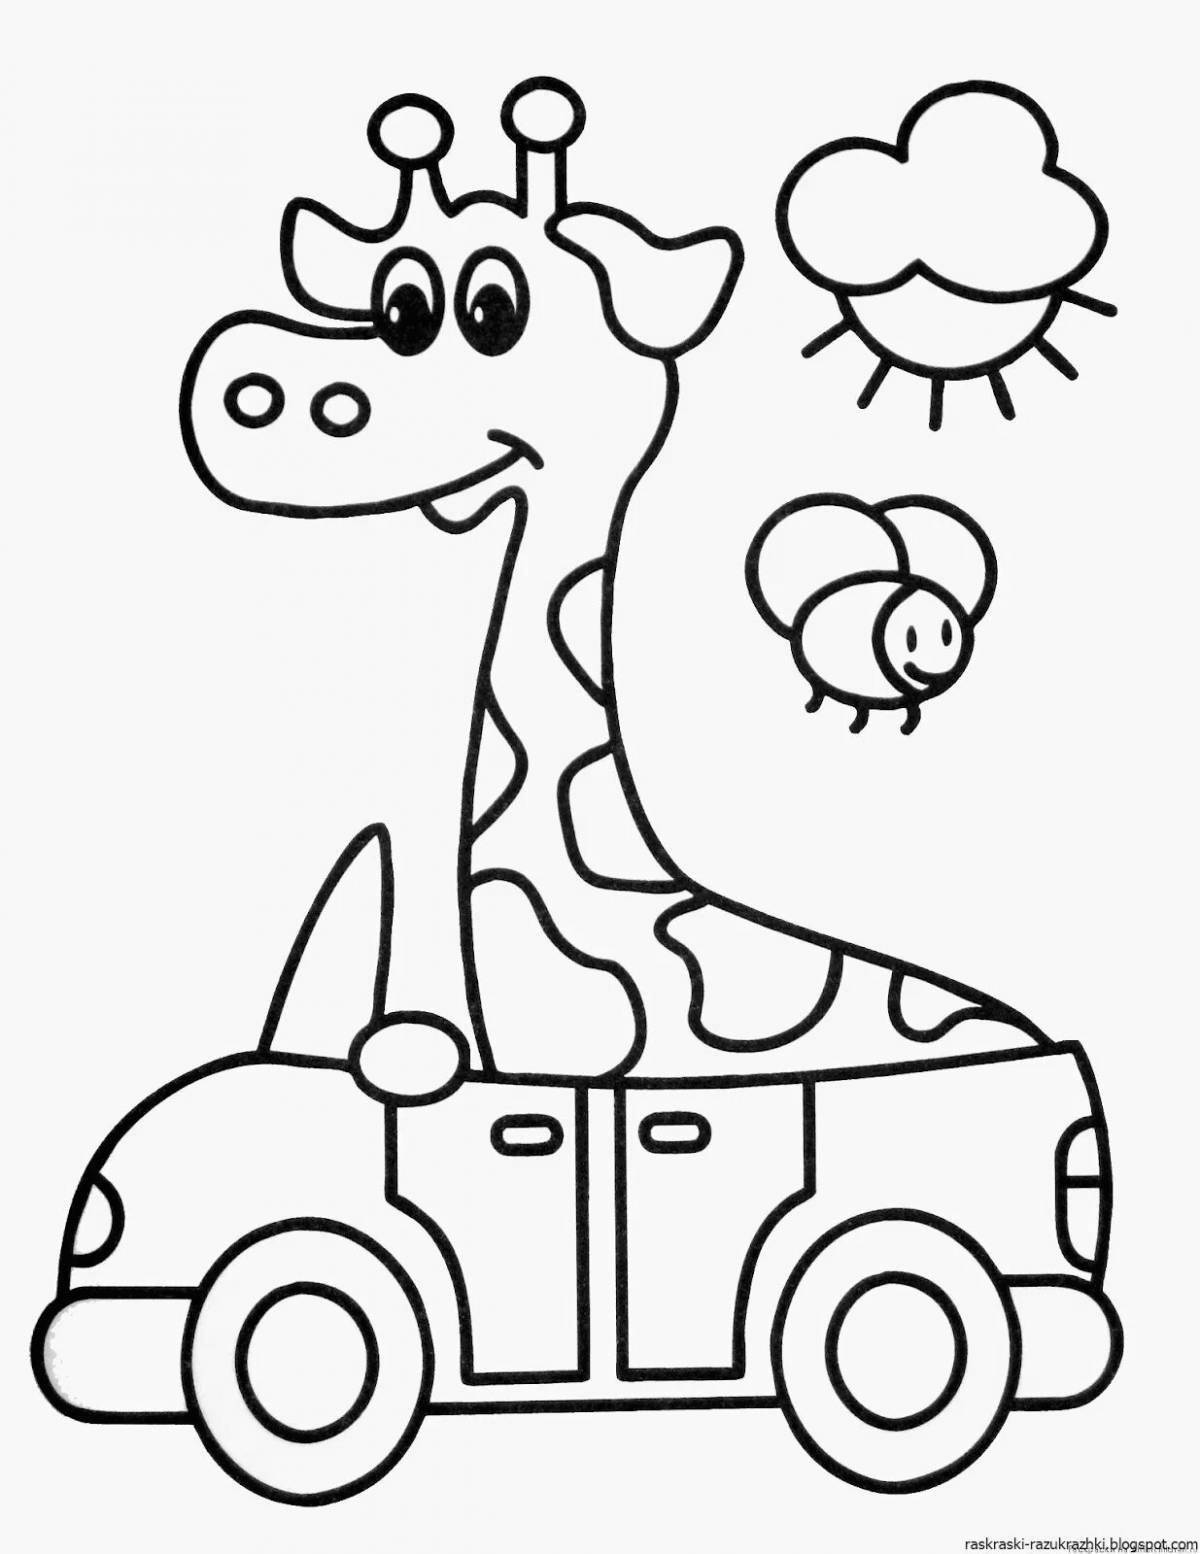 Fabulous car coloring pages for 5 year olds